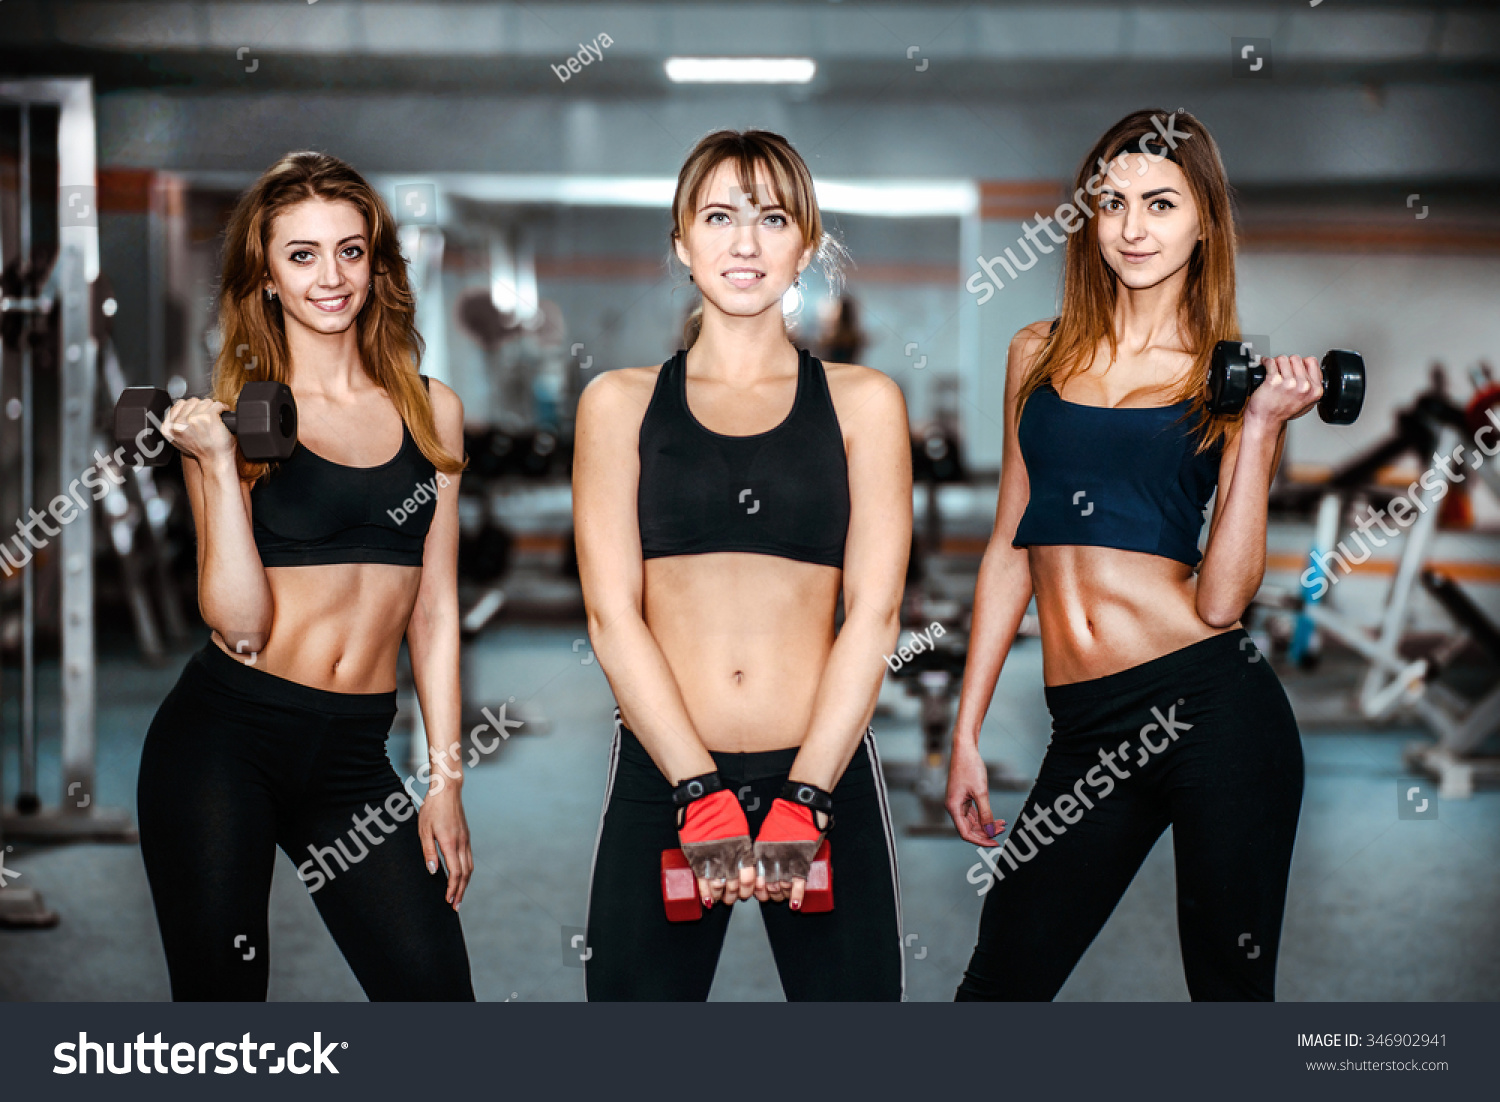 stock-photo-three-pretty-girls-workout-in-the-gym-346902941.jpg